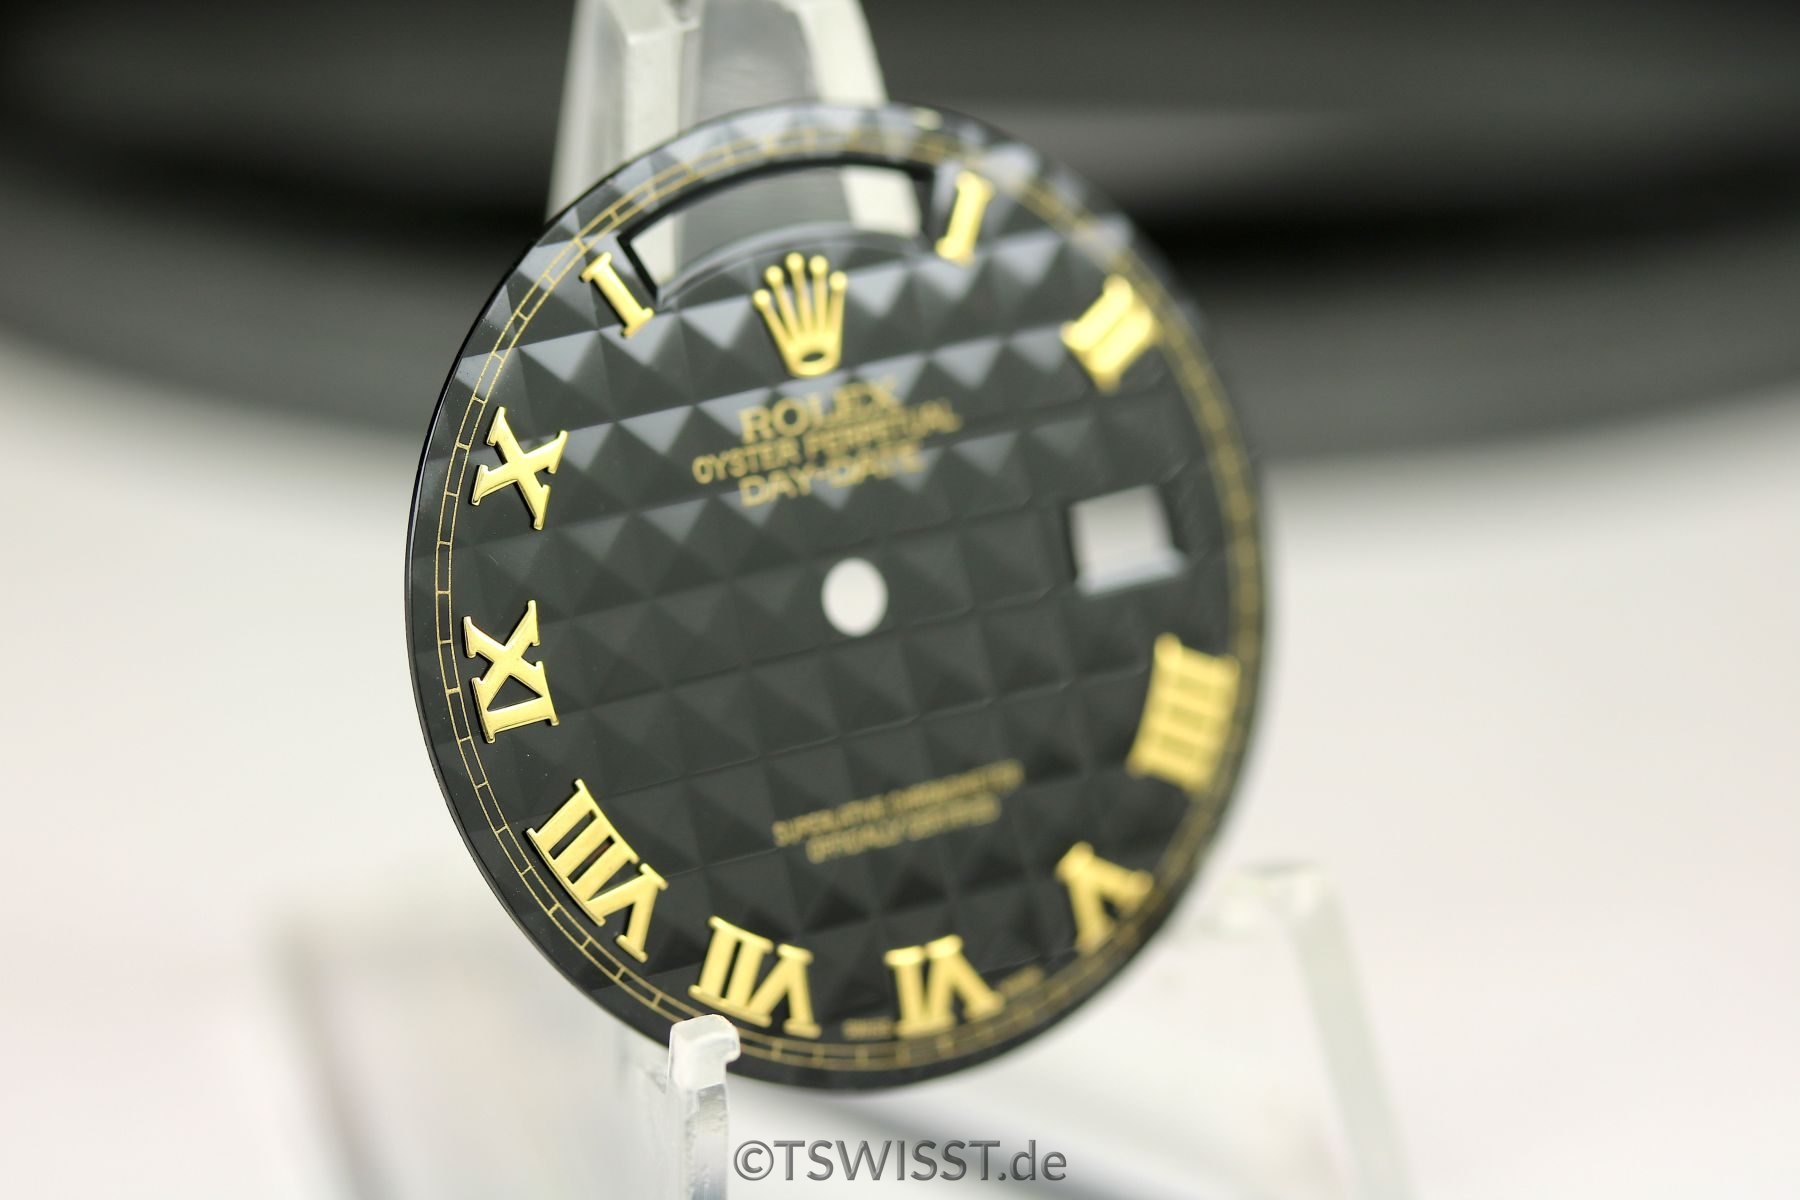 Rolex Day-Date honeycomb dial